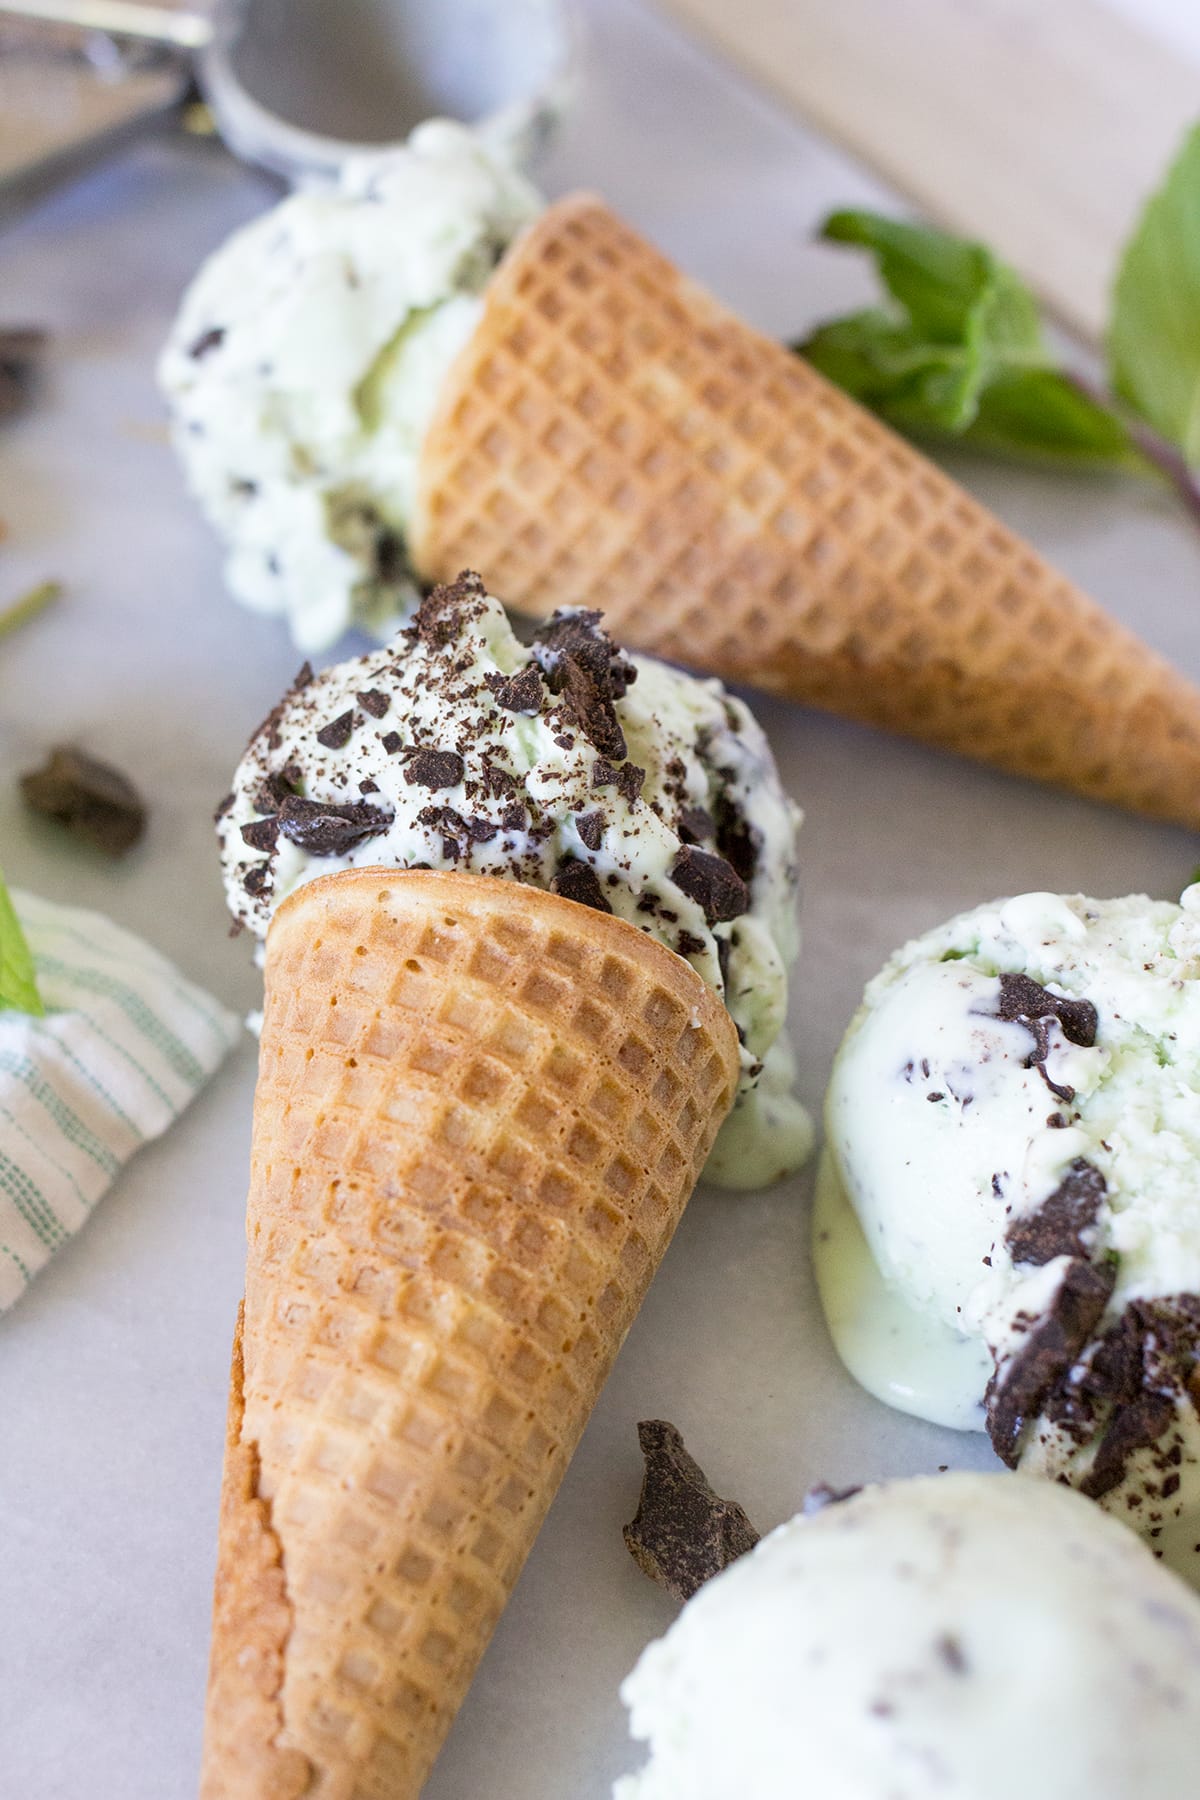 No Churn Real Mint Chocolate Chip Ice Cream made with fresh mint and real cream